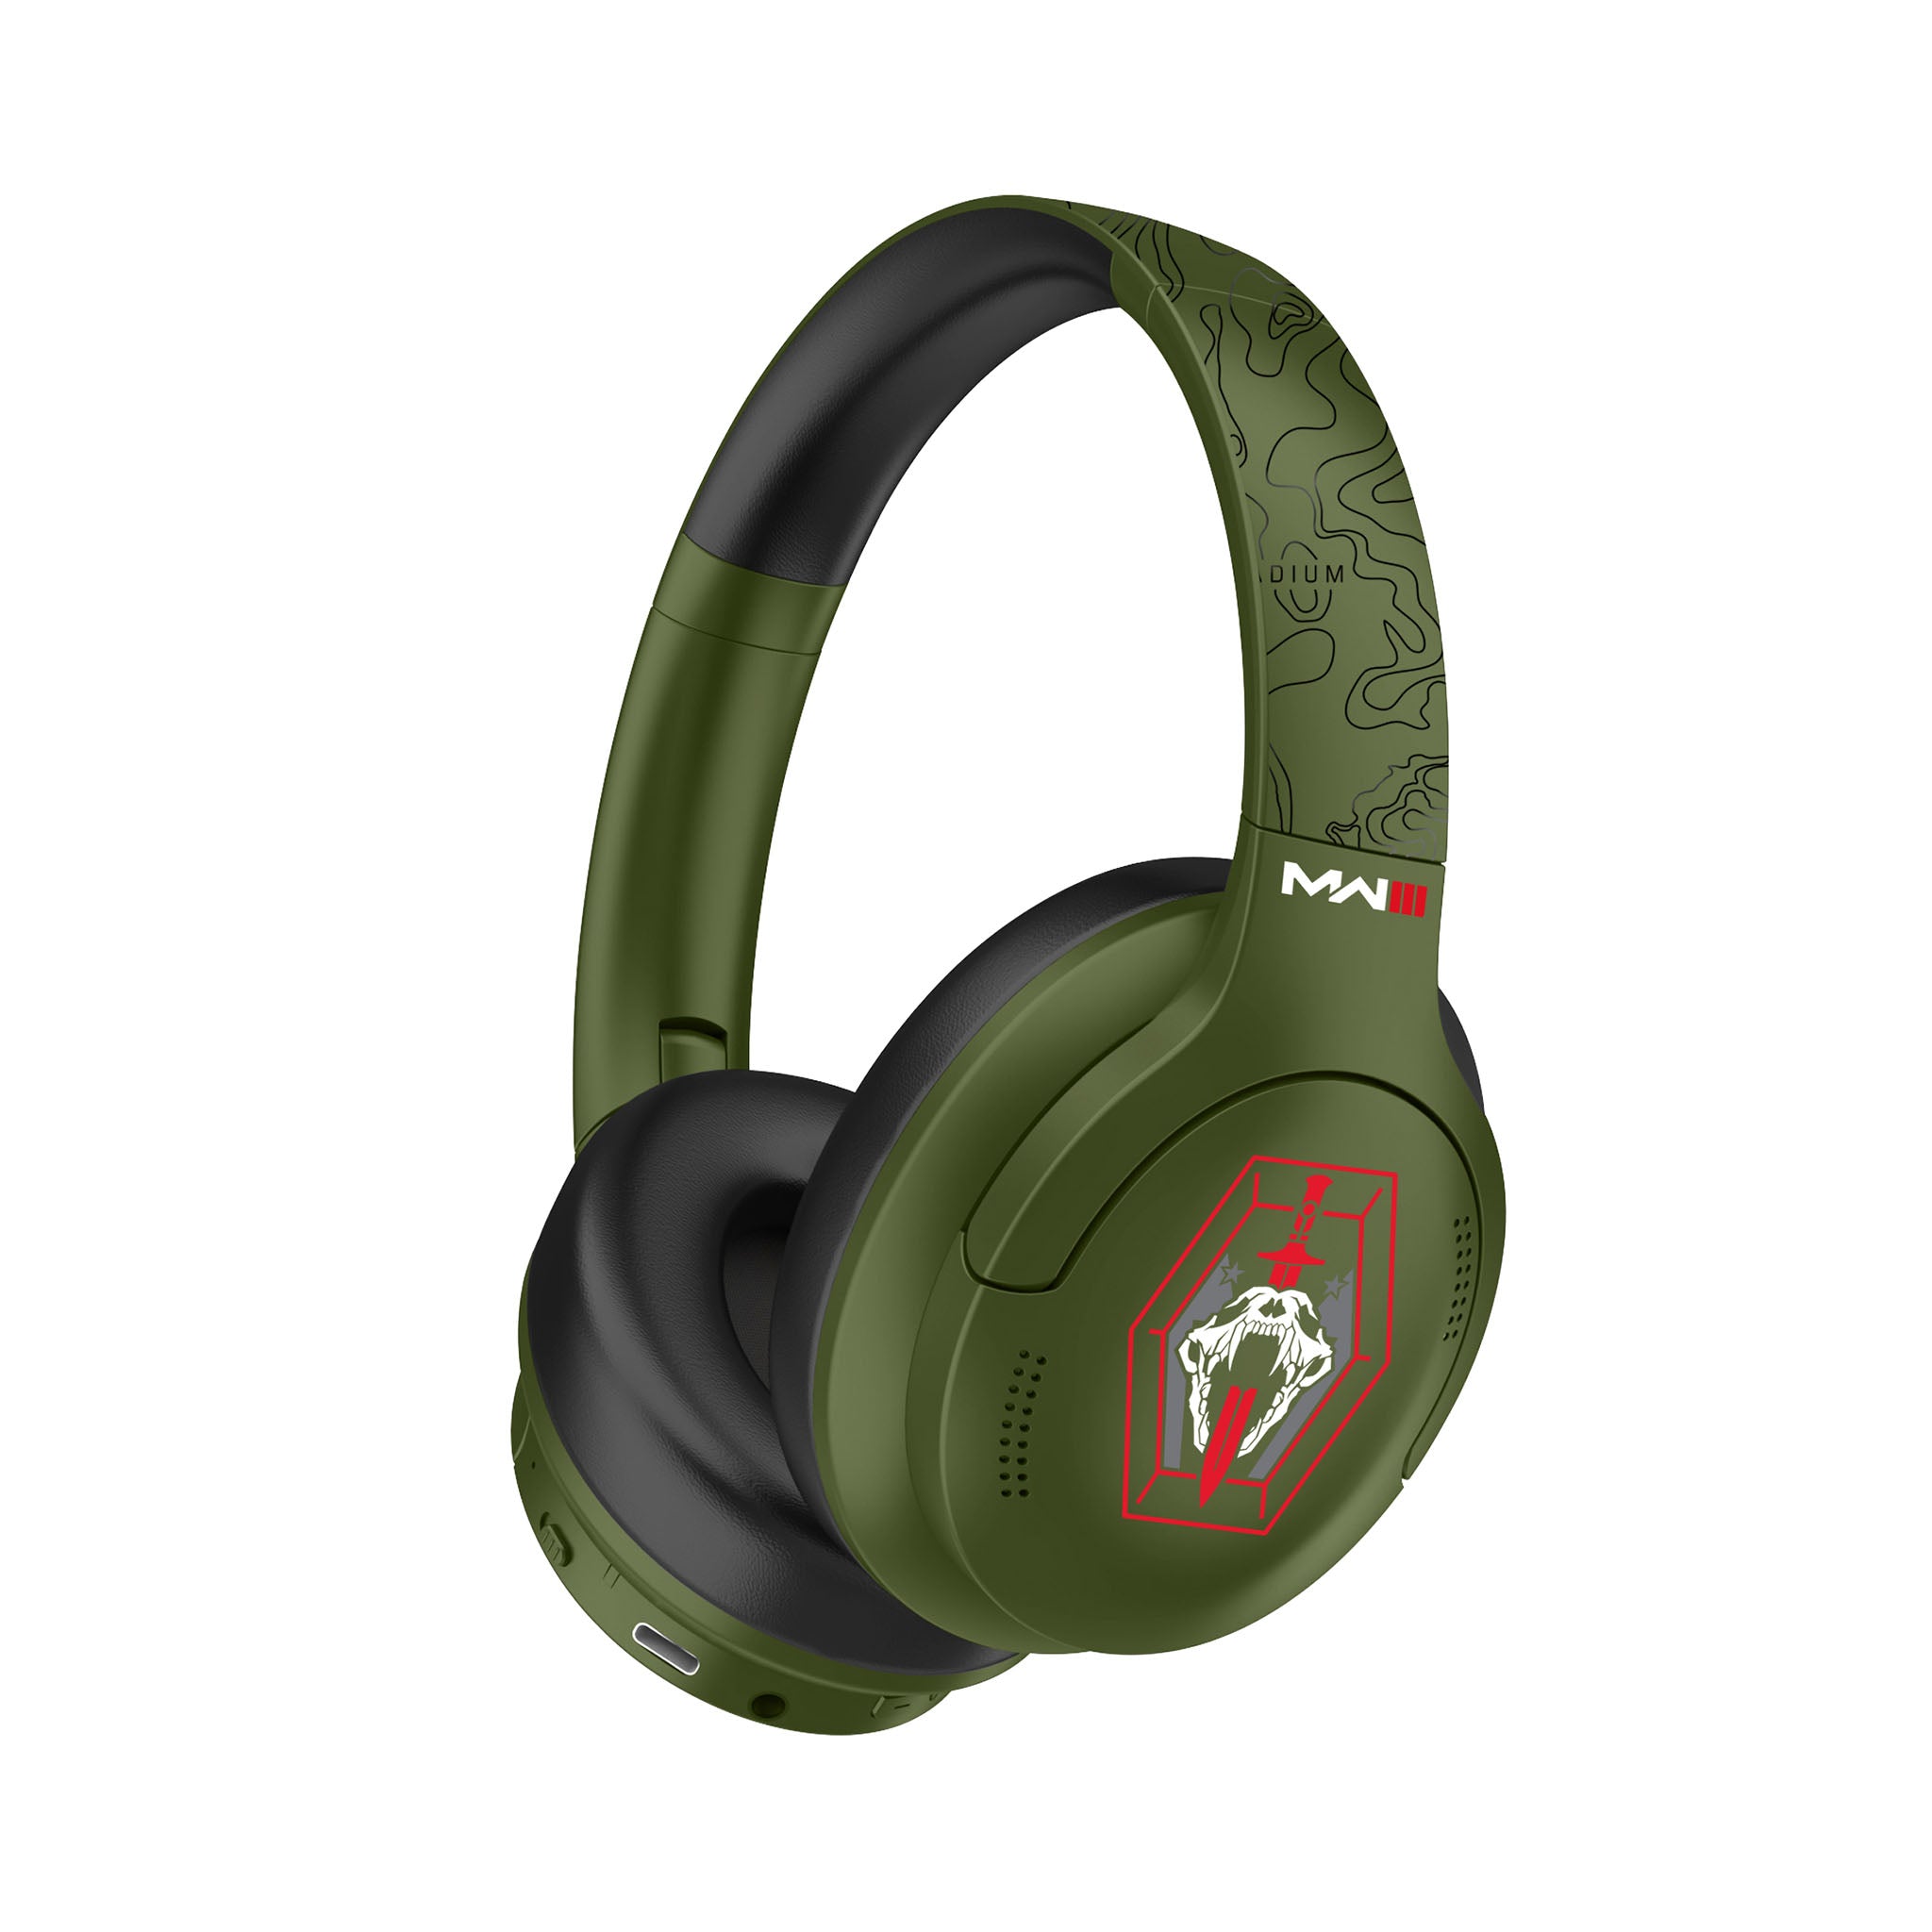 Call of Duty MW3 ANC Wireless headphones Olive snake